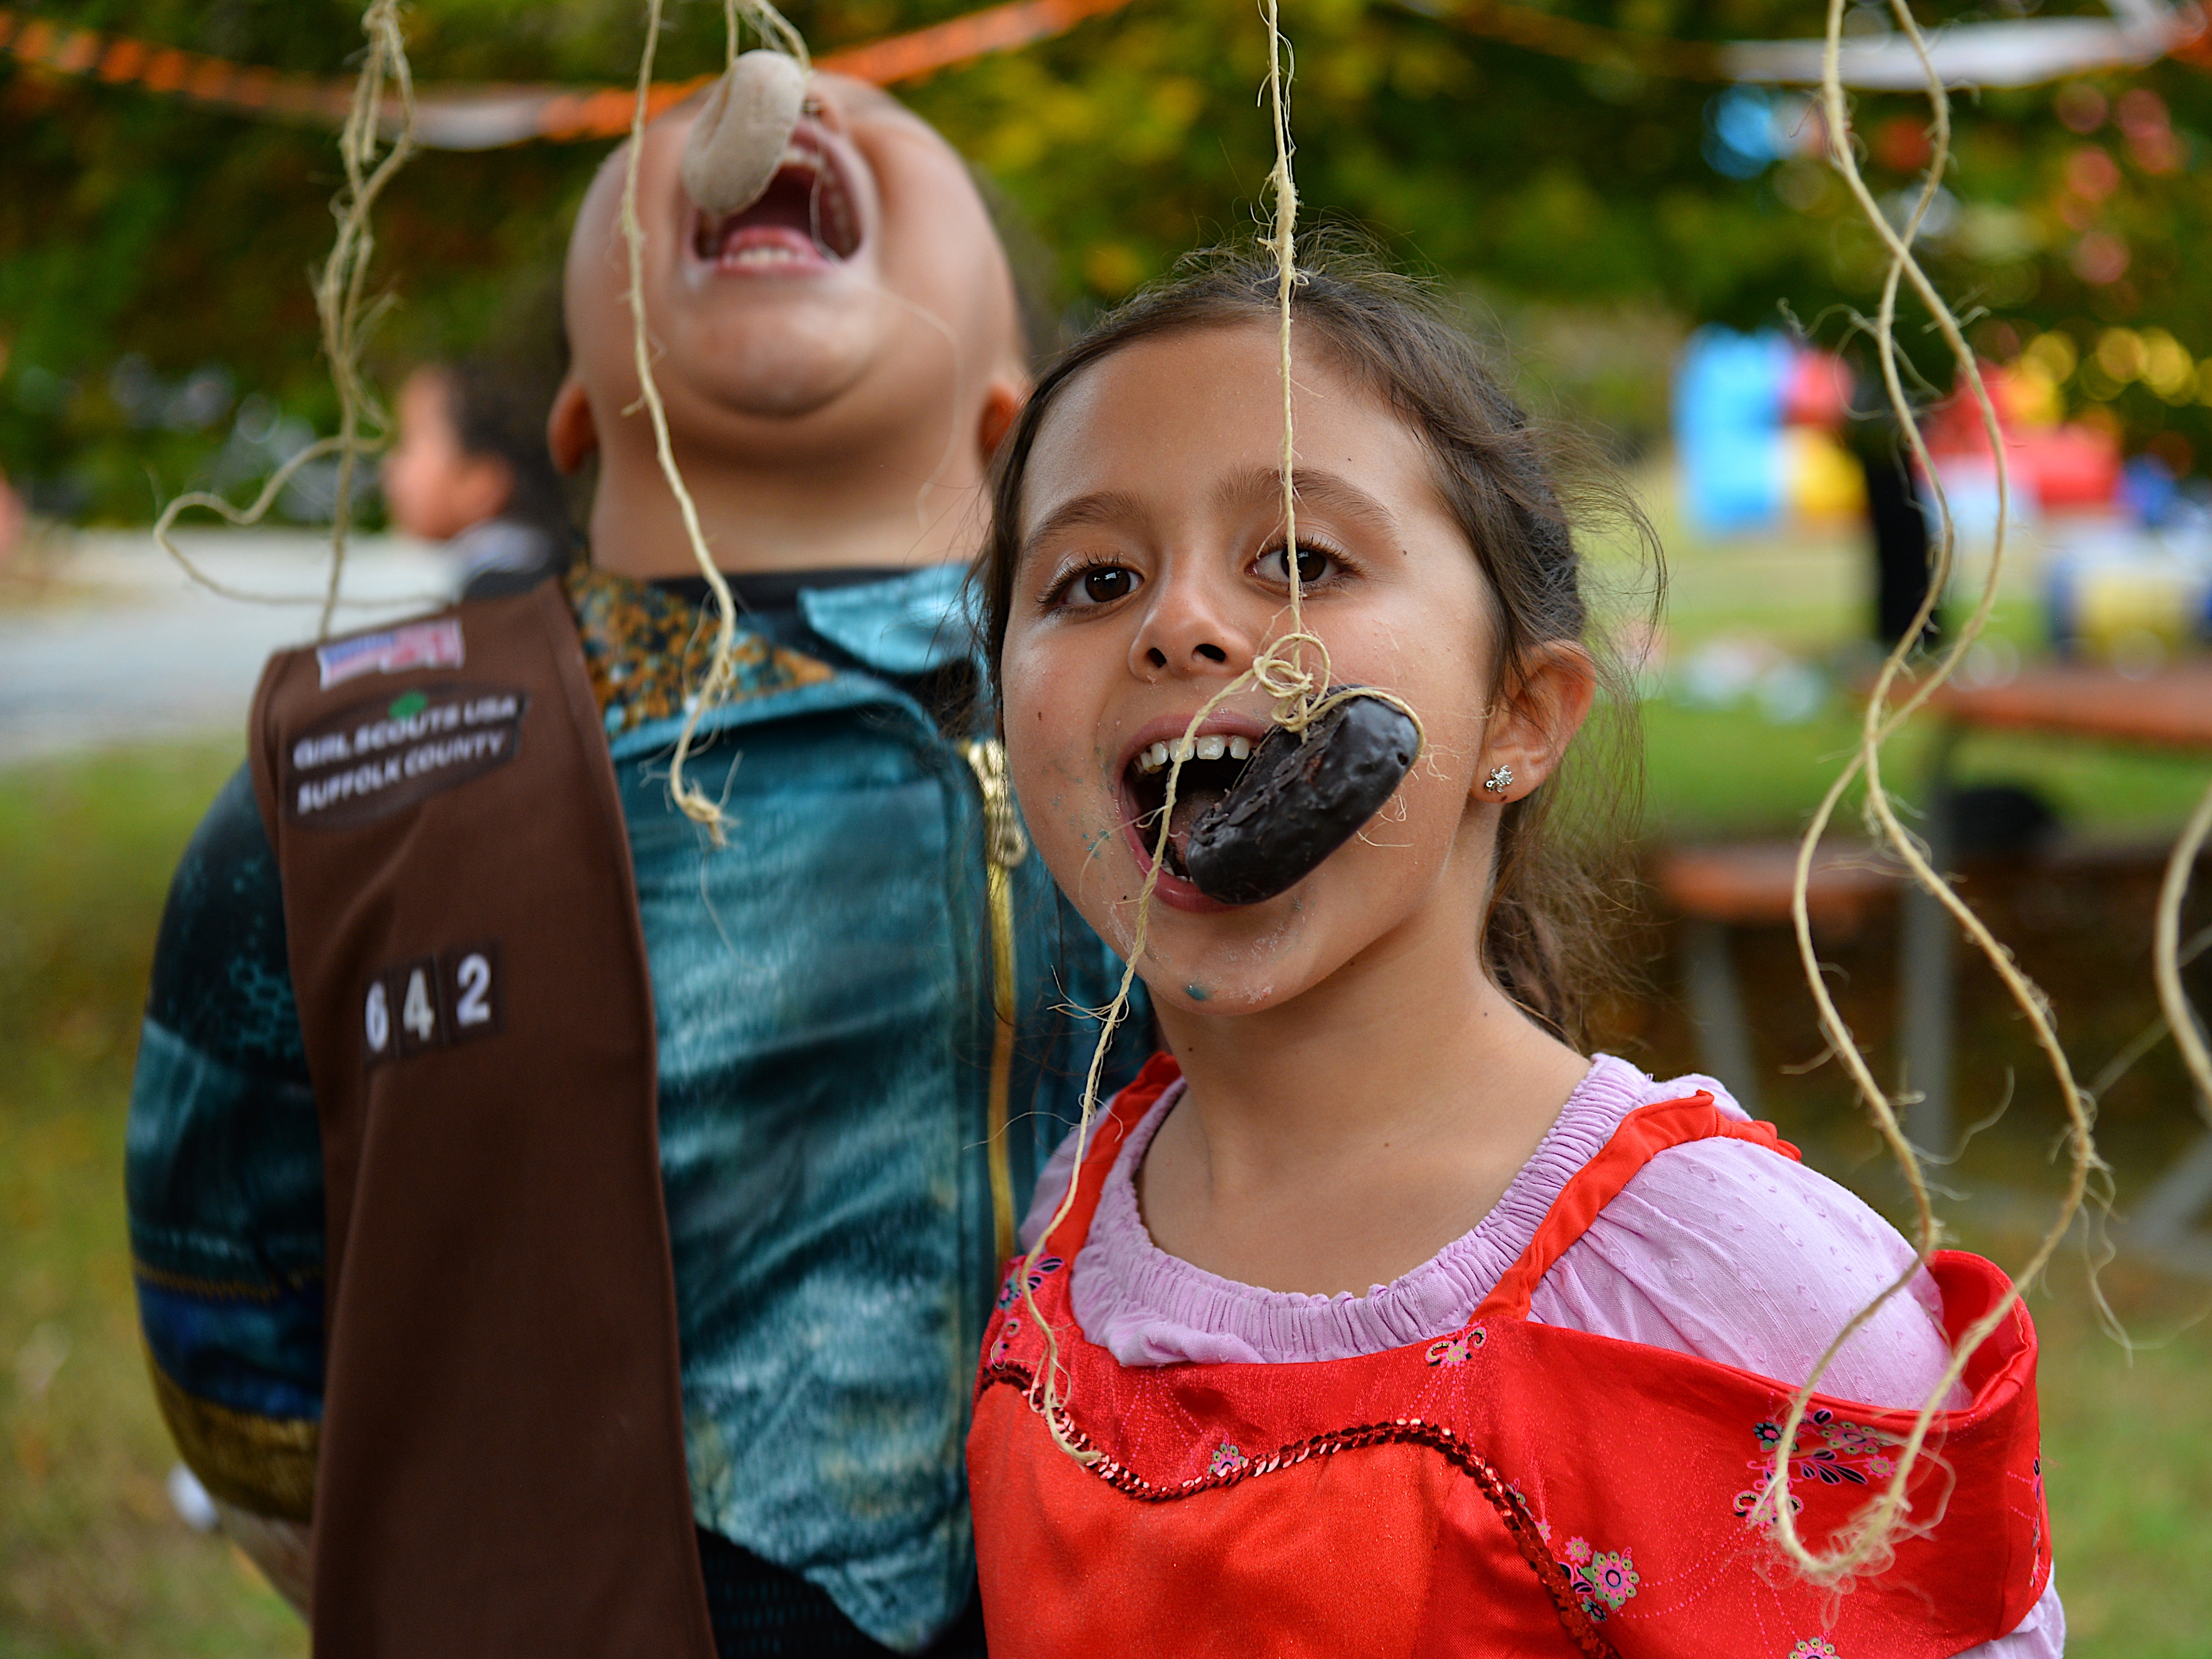 The Bridgehampton Child Care and Recreational Center hosted a Halloween party on Friday afternoon, during which Kellis Quinn and Maya McDonald angled for donuts. KYRIL BROMLEY